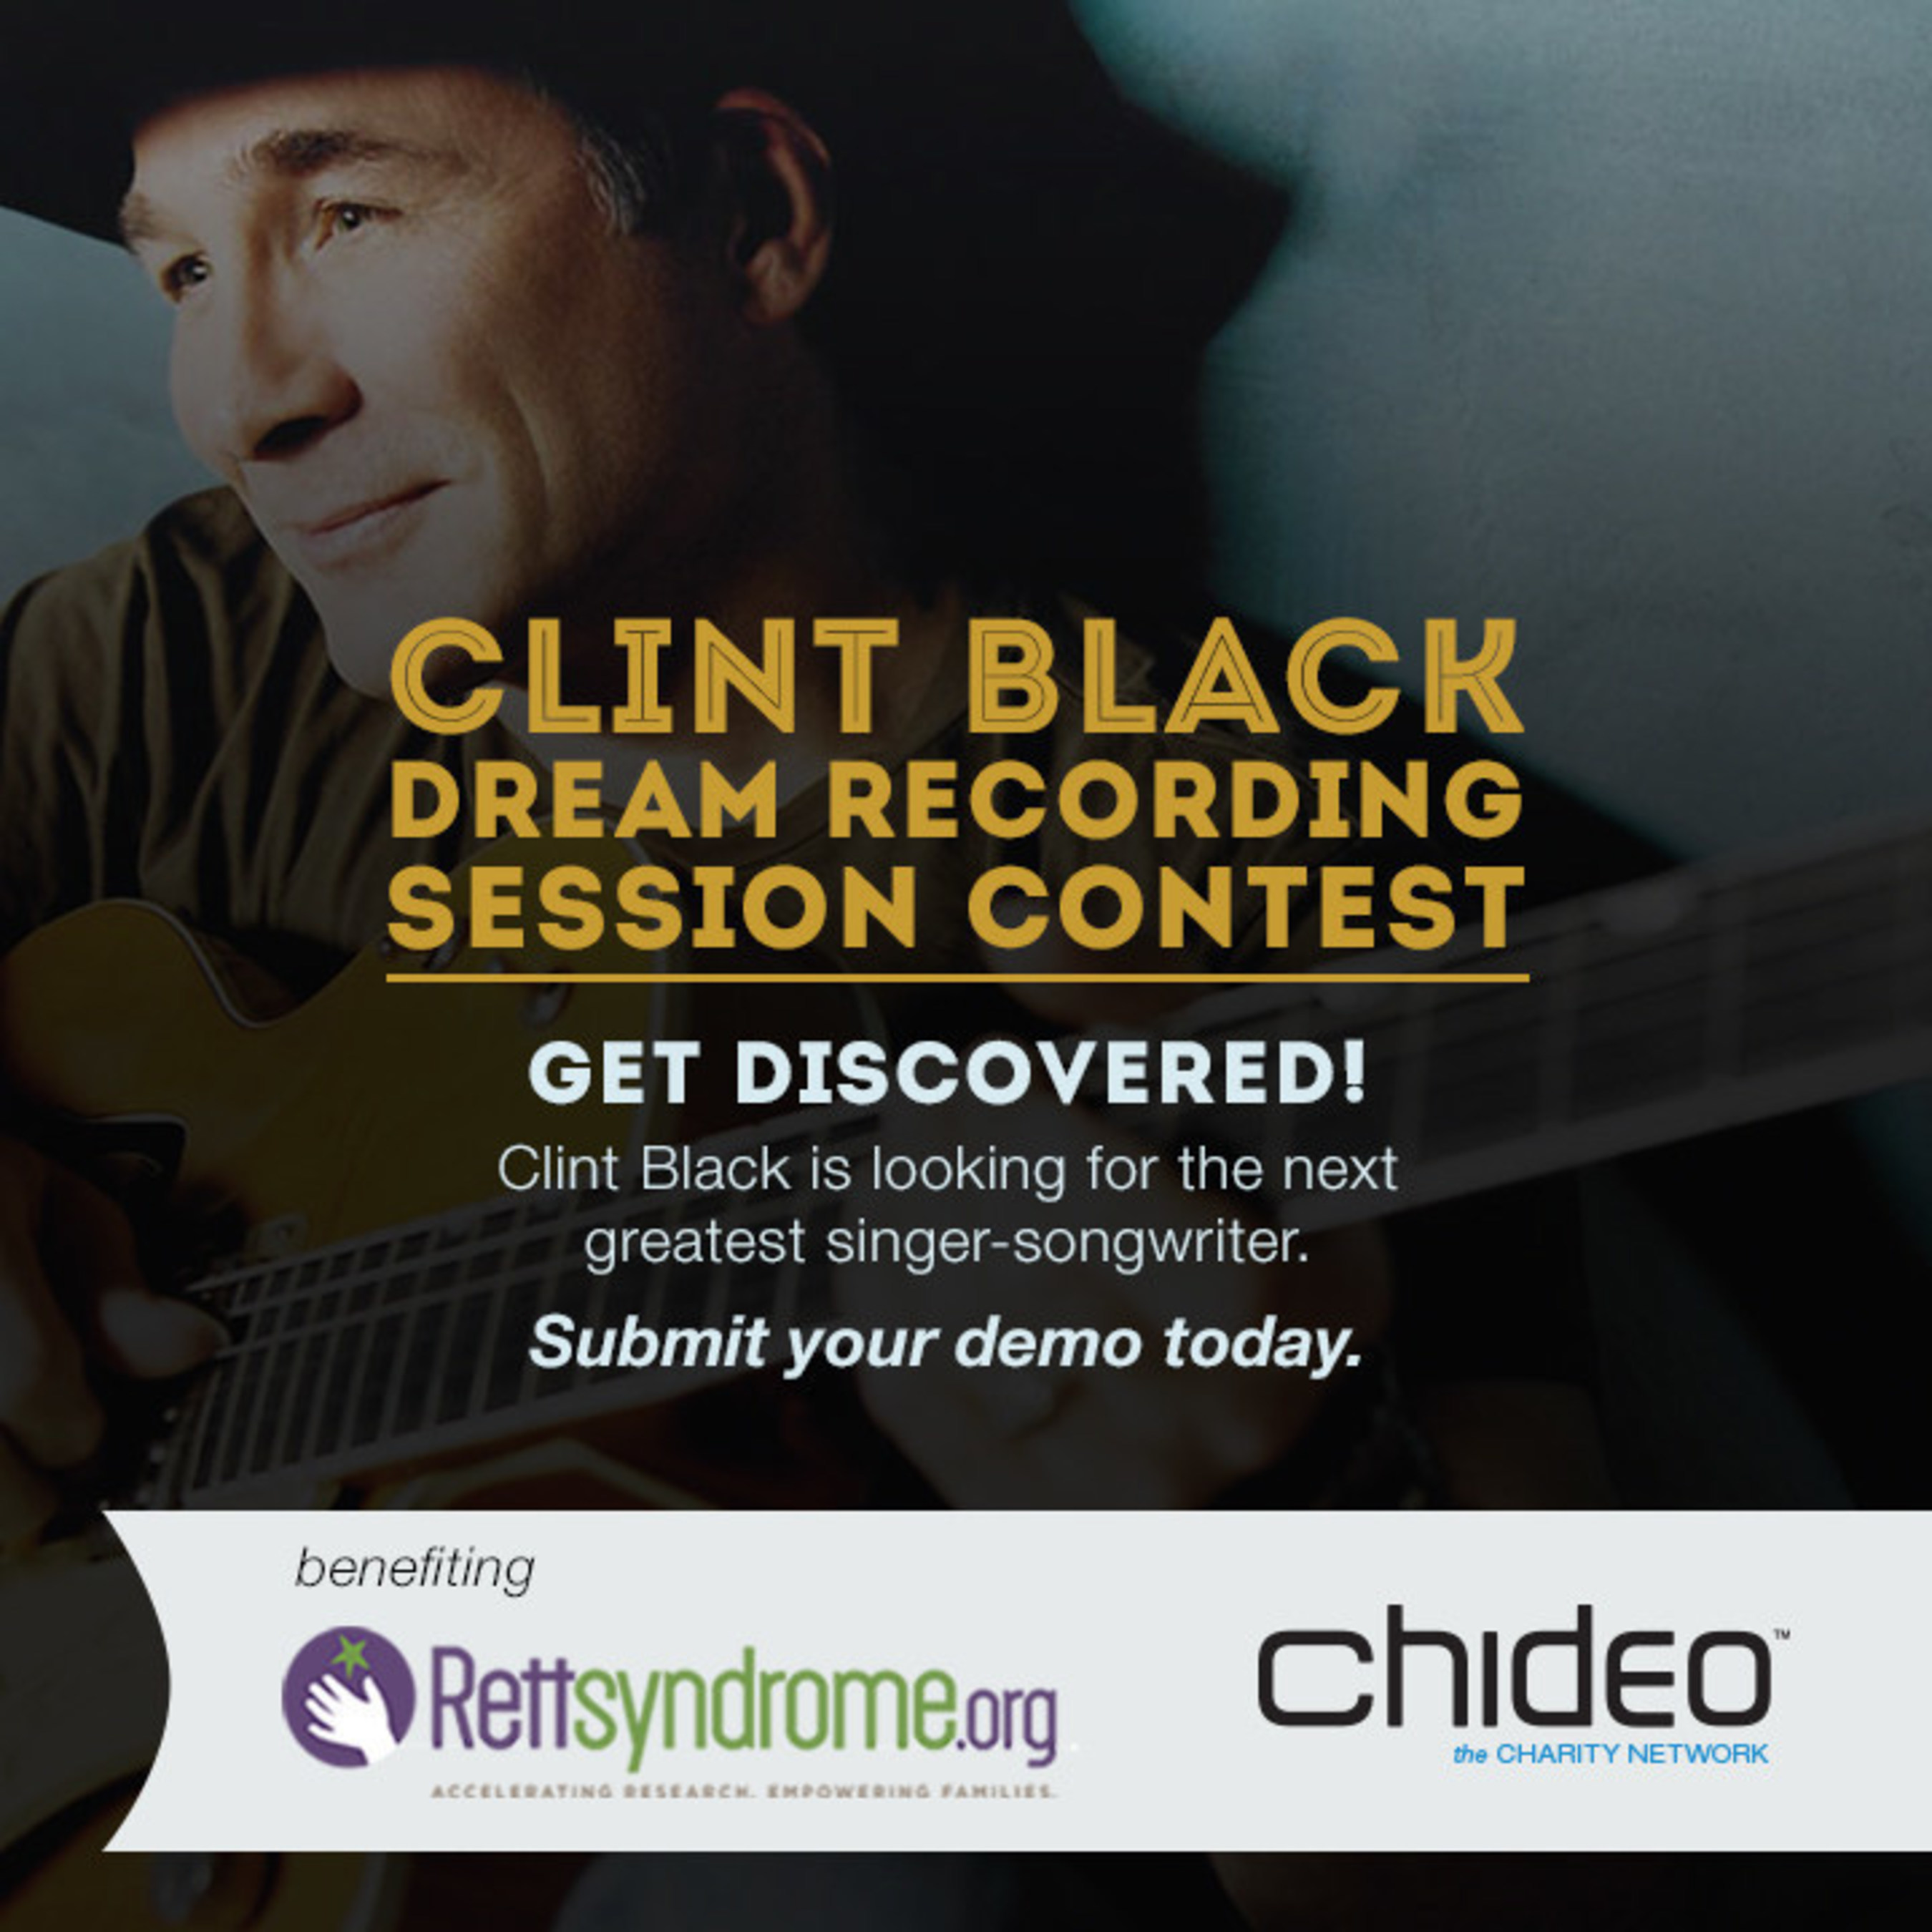 Country music legend Clint Black launches contest to find America's next great singer-songwriter. Visit Chideo.com to enter.